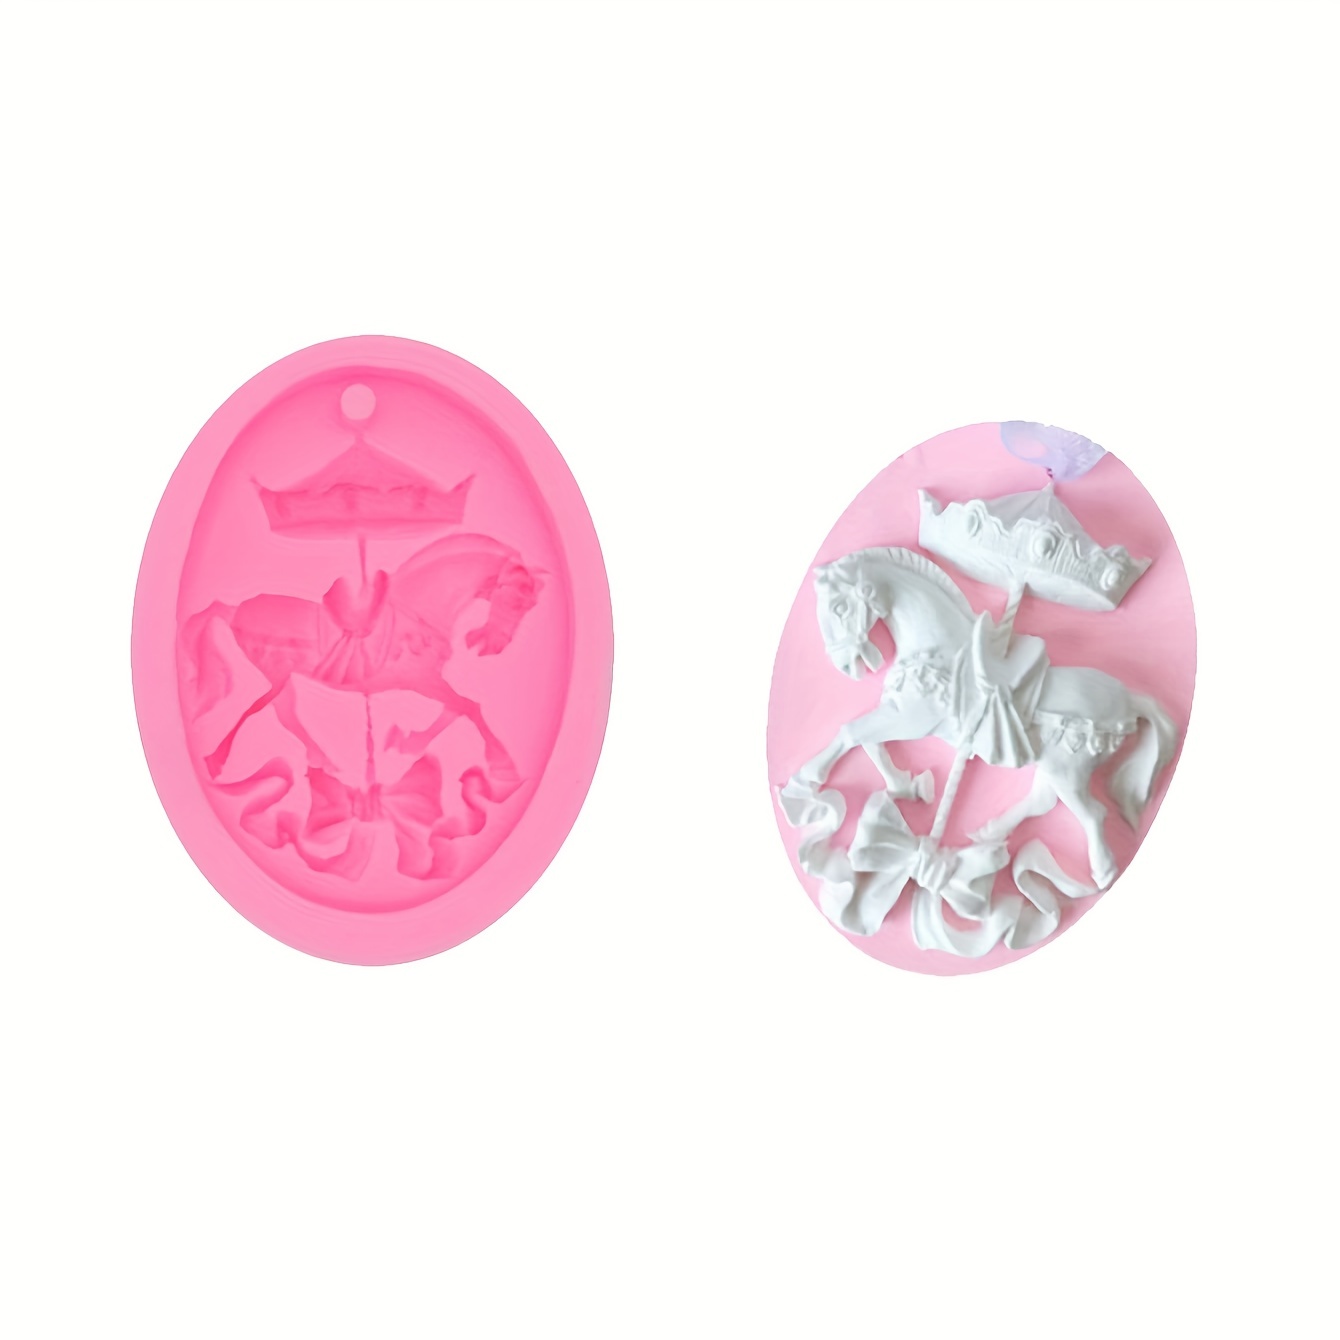 

1pc Carousel Resin Casting Mold, Carousel Silicone Chocolate Candy Making Mold Merry-go-round Carousel Party Cake Decoration Tool Soap Emulsion Stick Plaster Mold